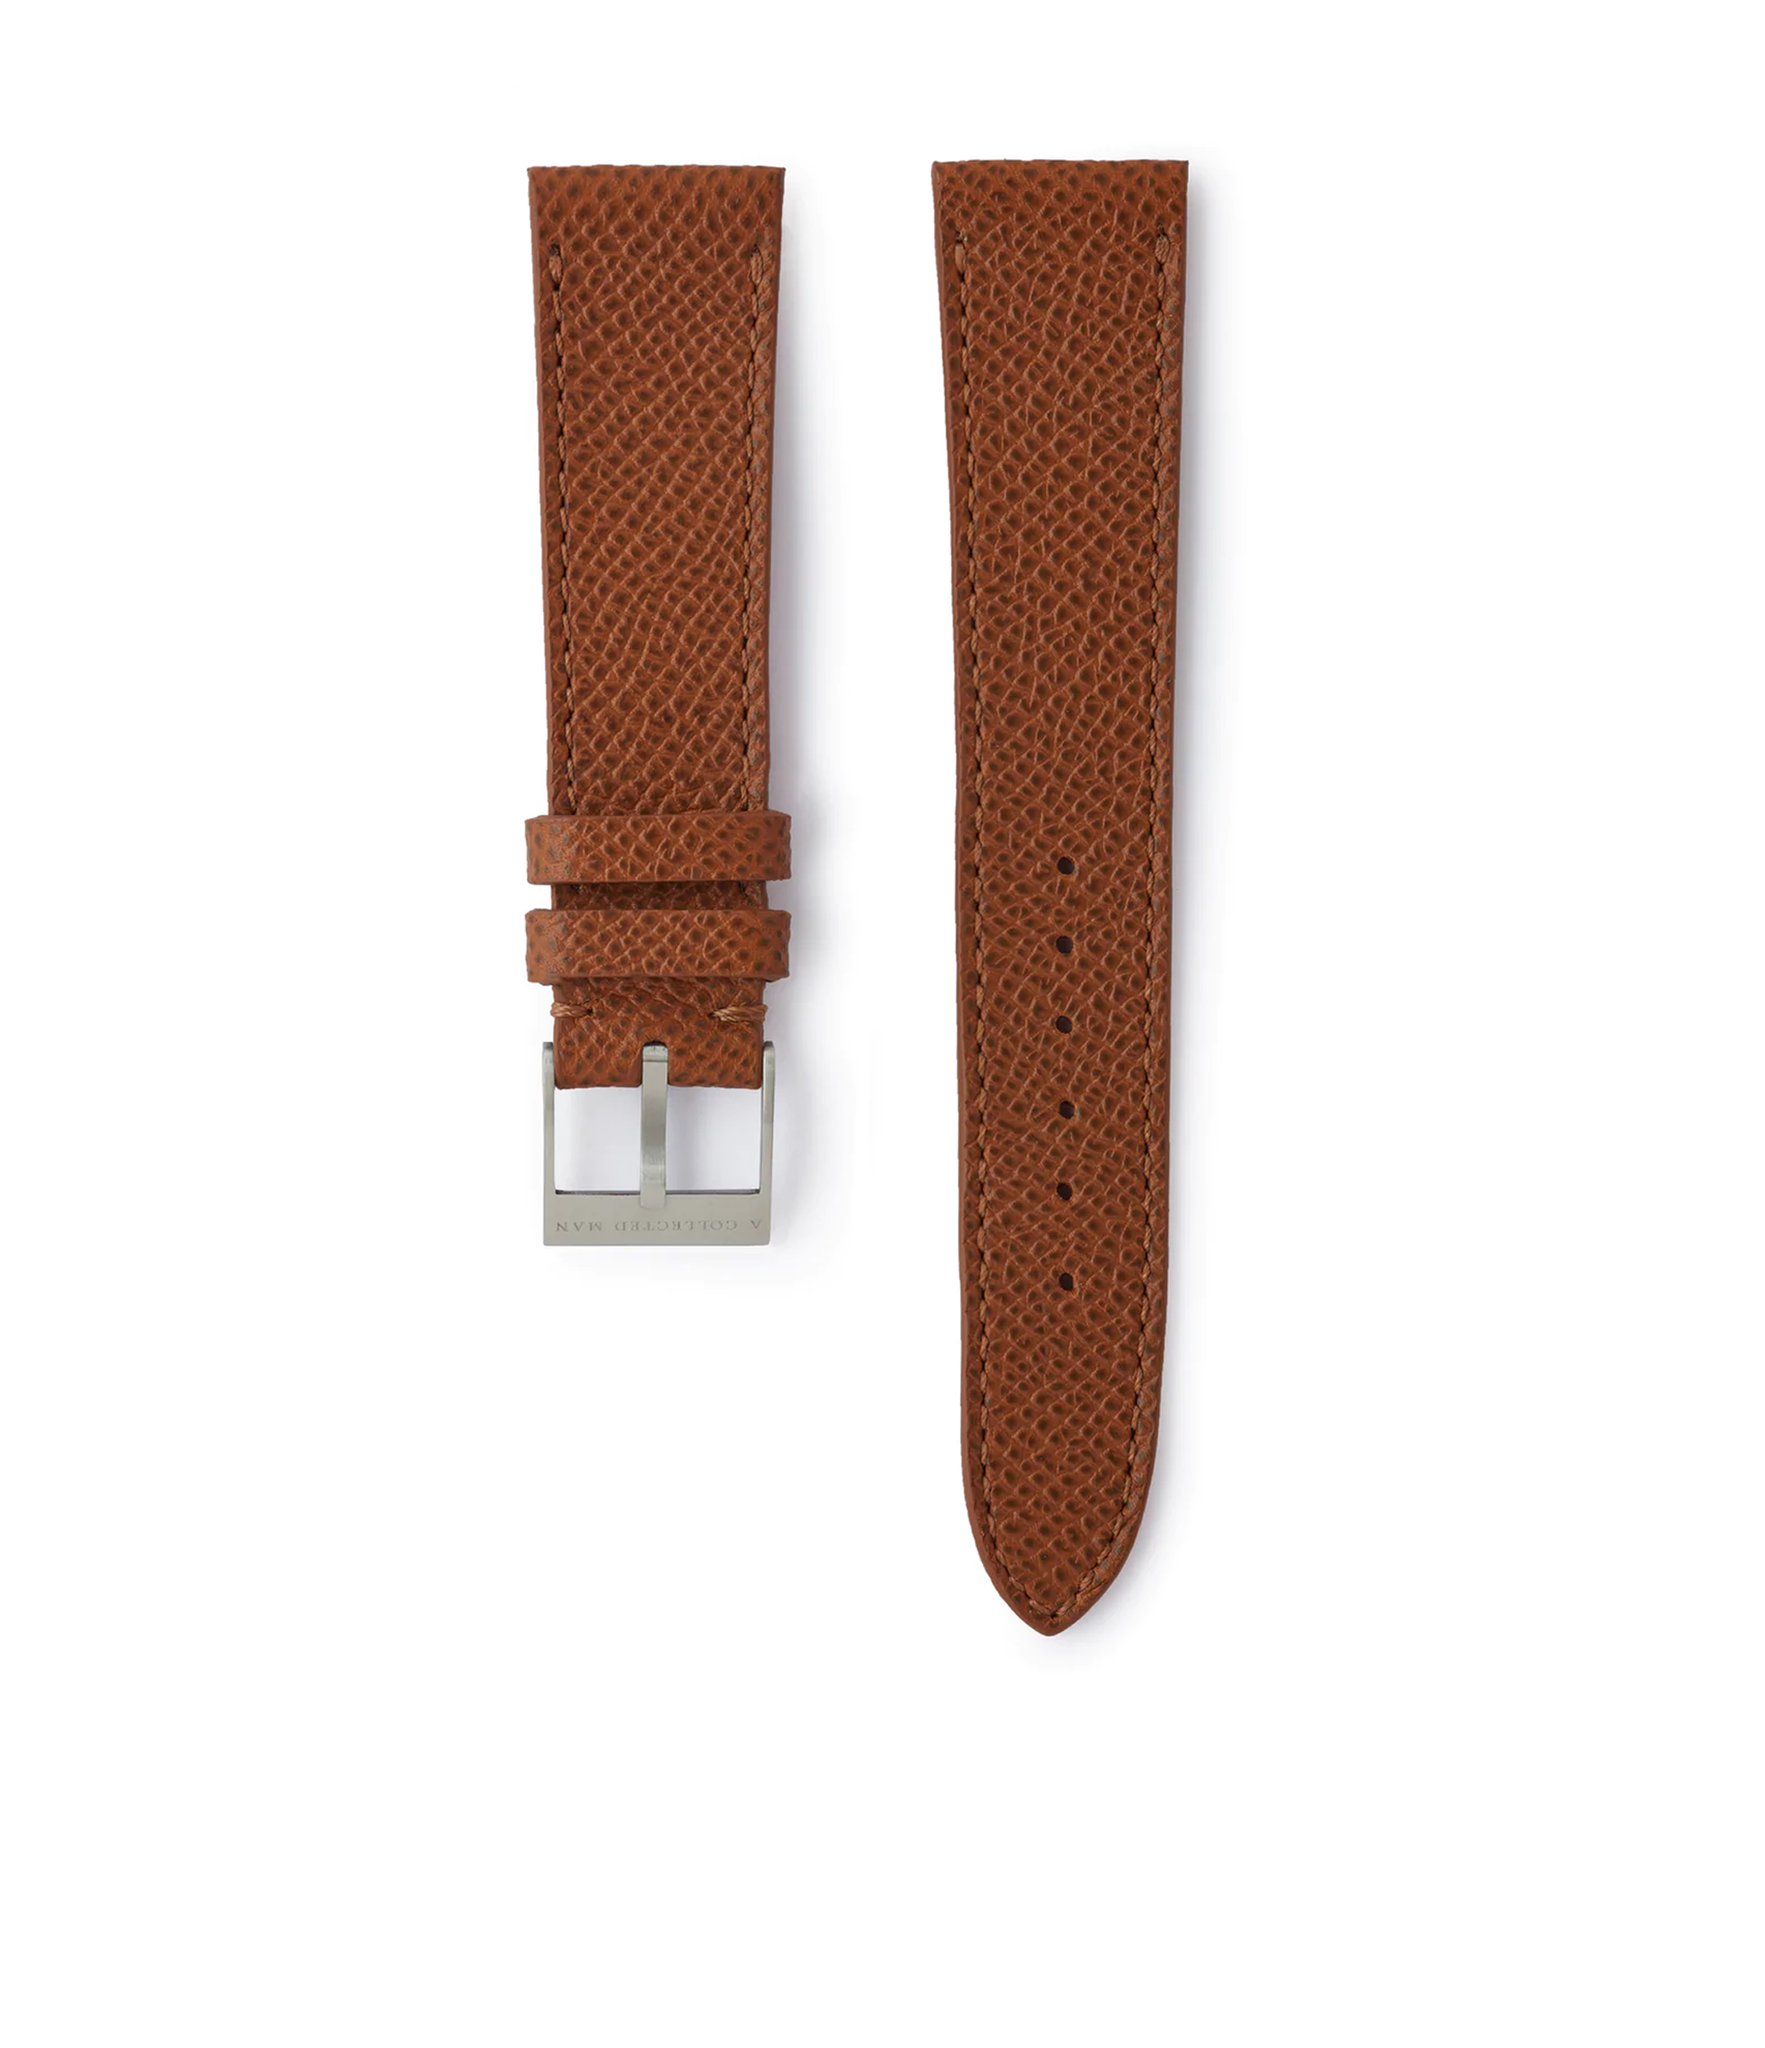 Order 18mm Marrakesh JPM watch strap safari tan brown saffiano leather quick-release springbars buckle handcrafted European-made for sale online at A Collected Man London